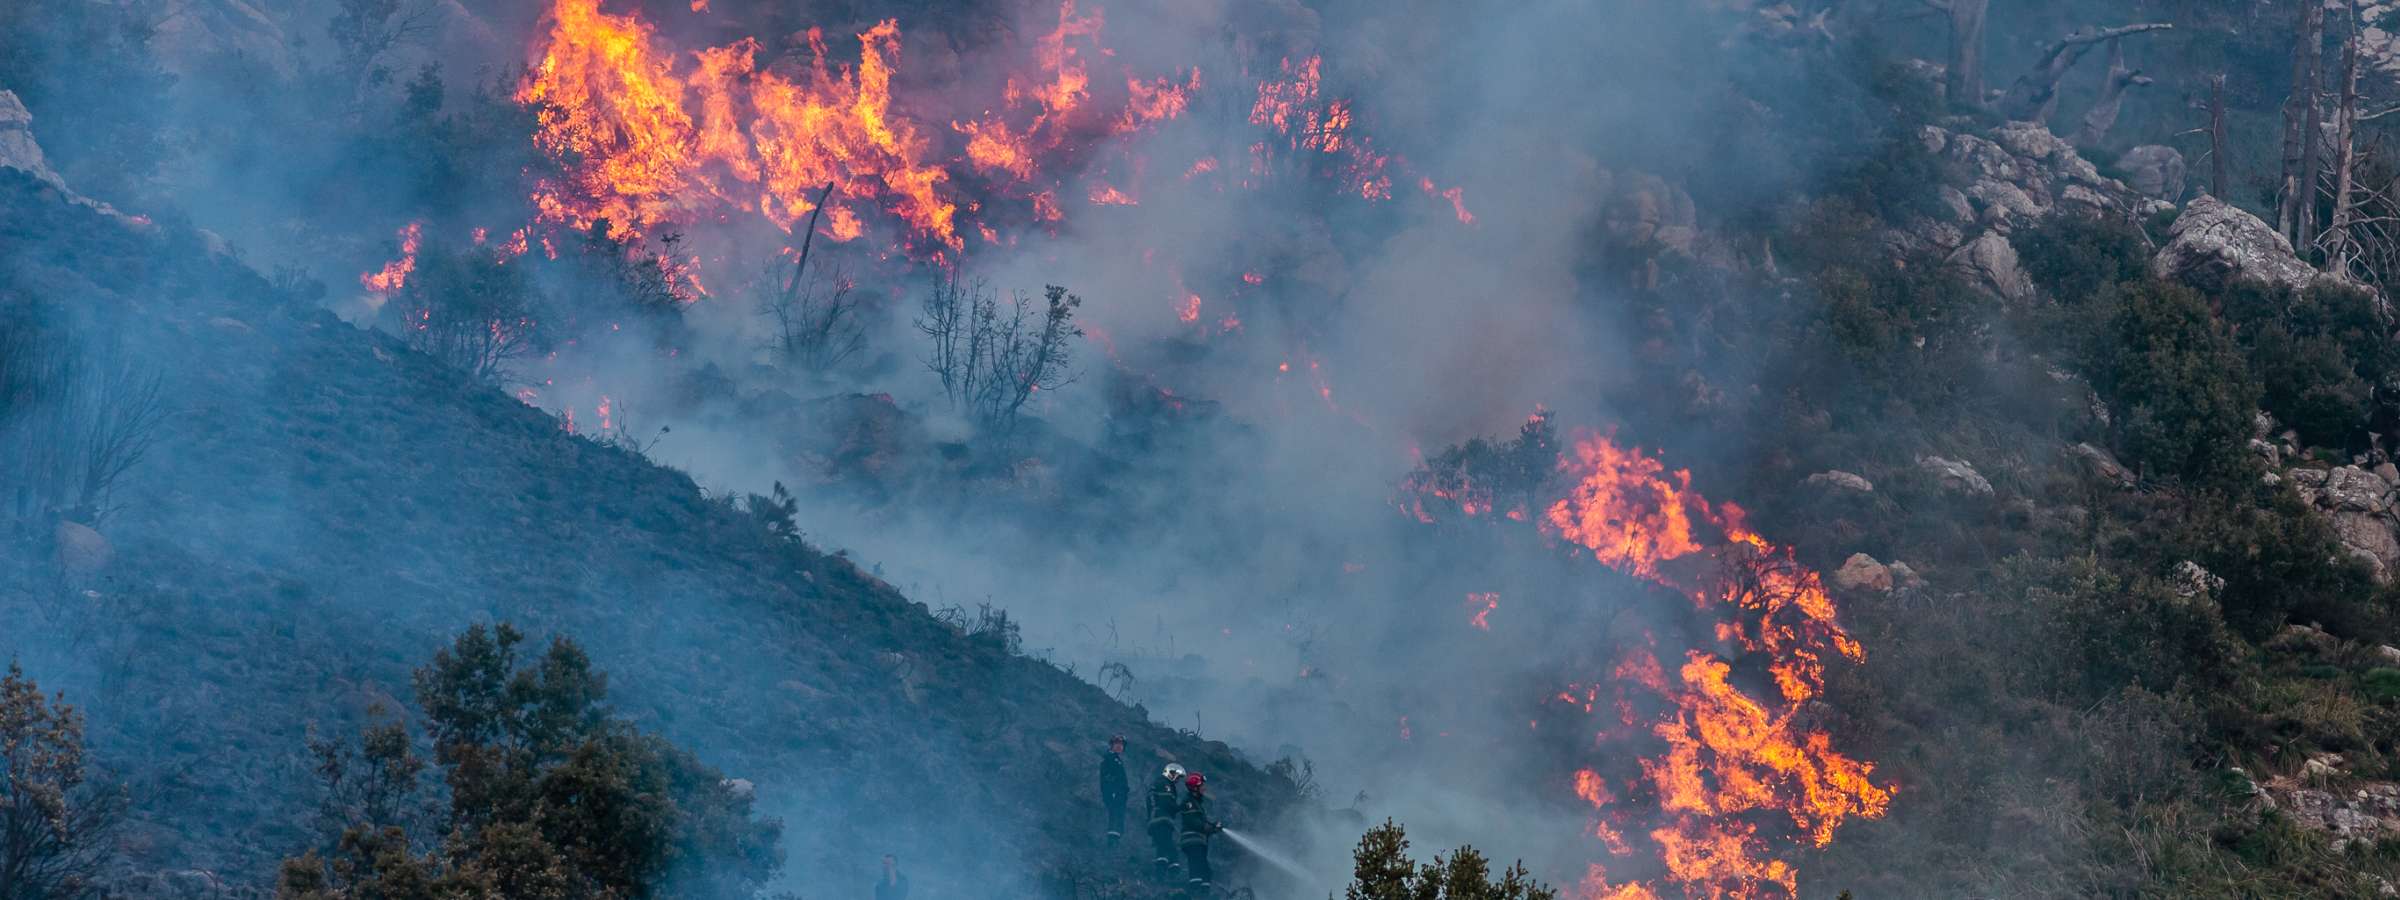 Image showing fire on hills